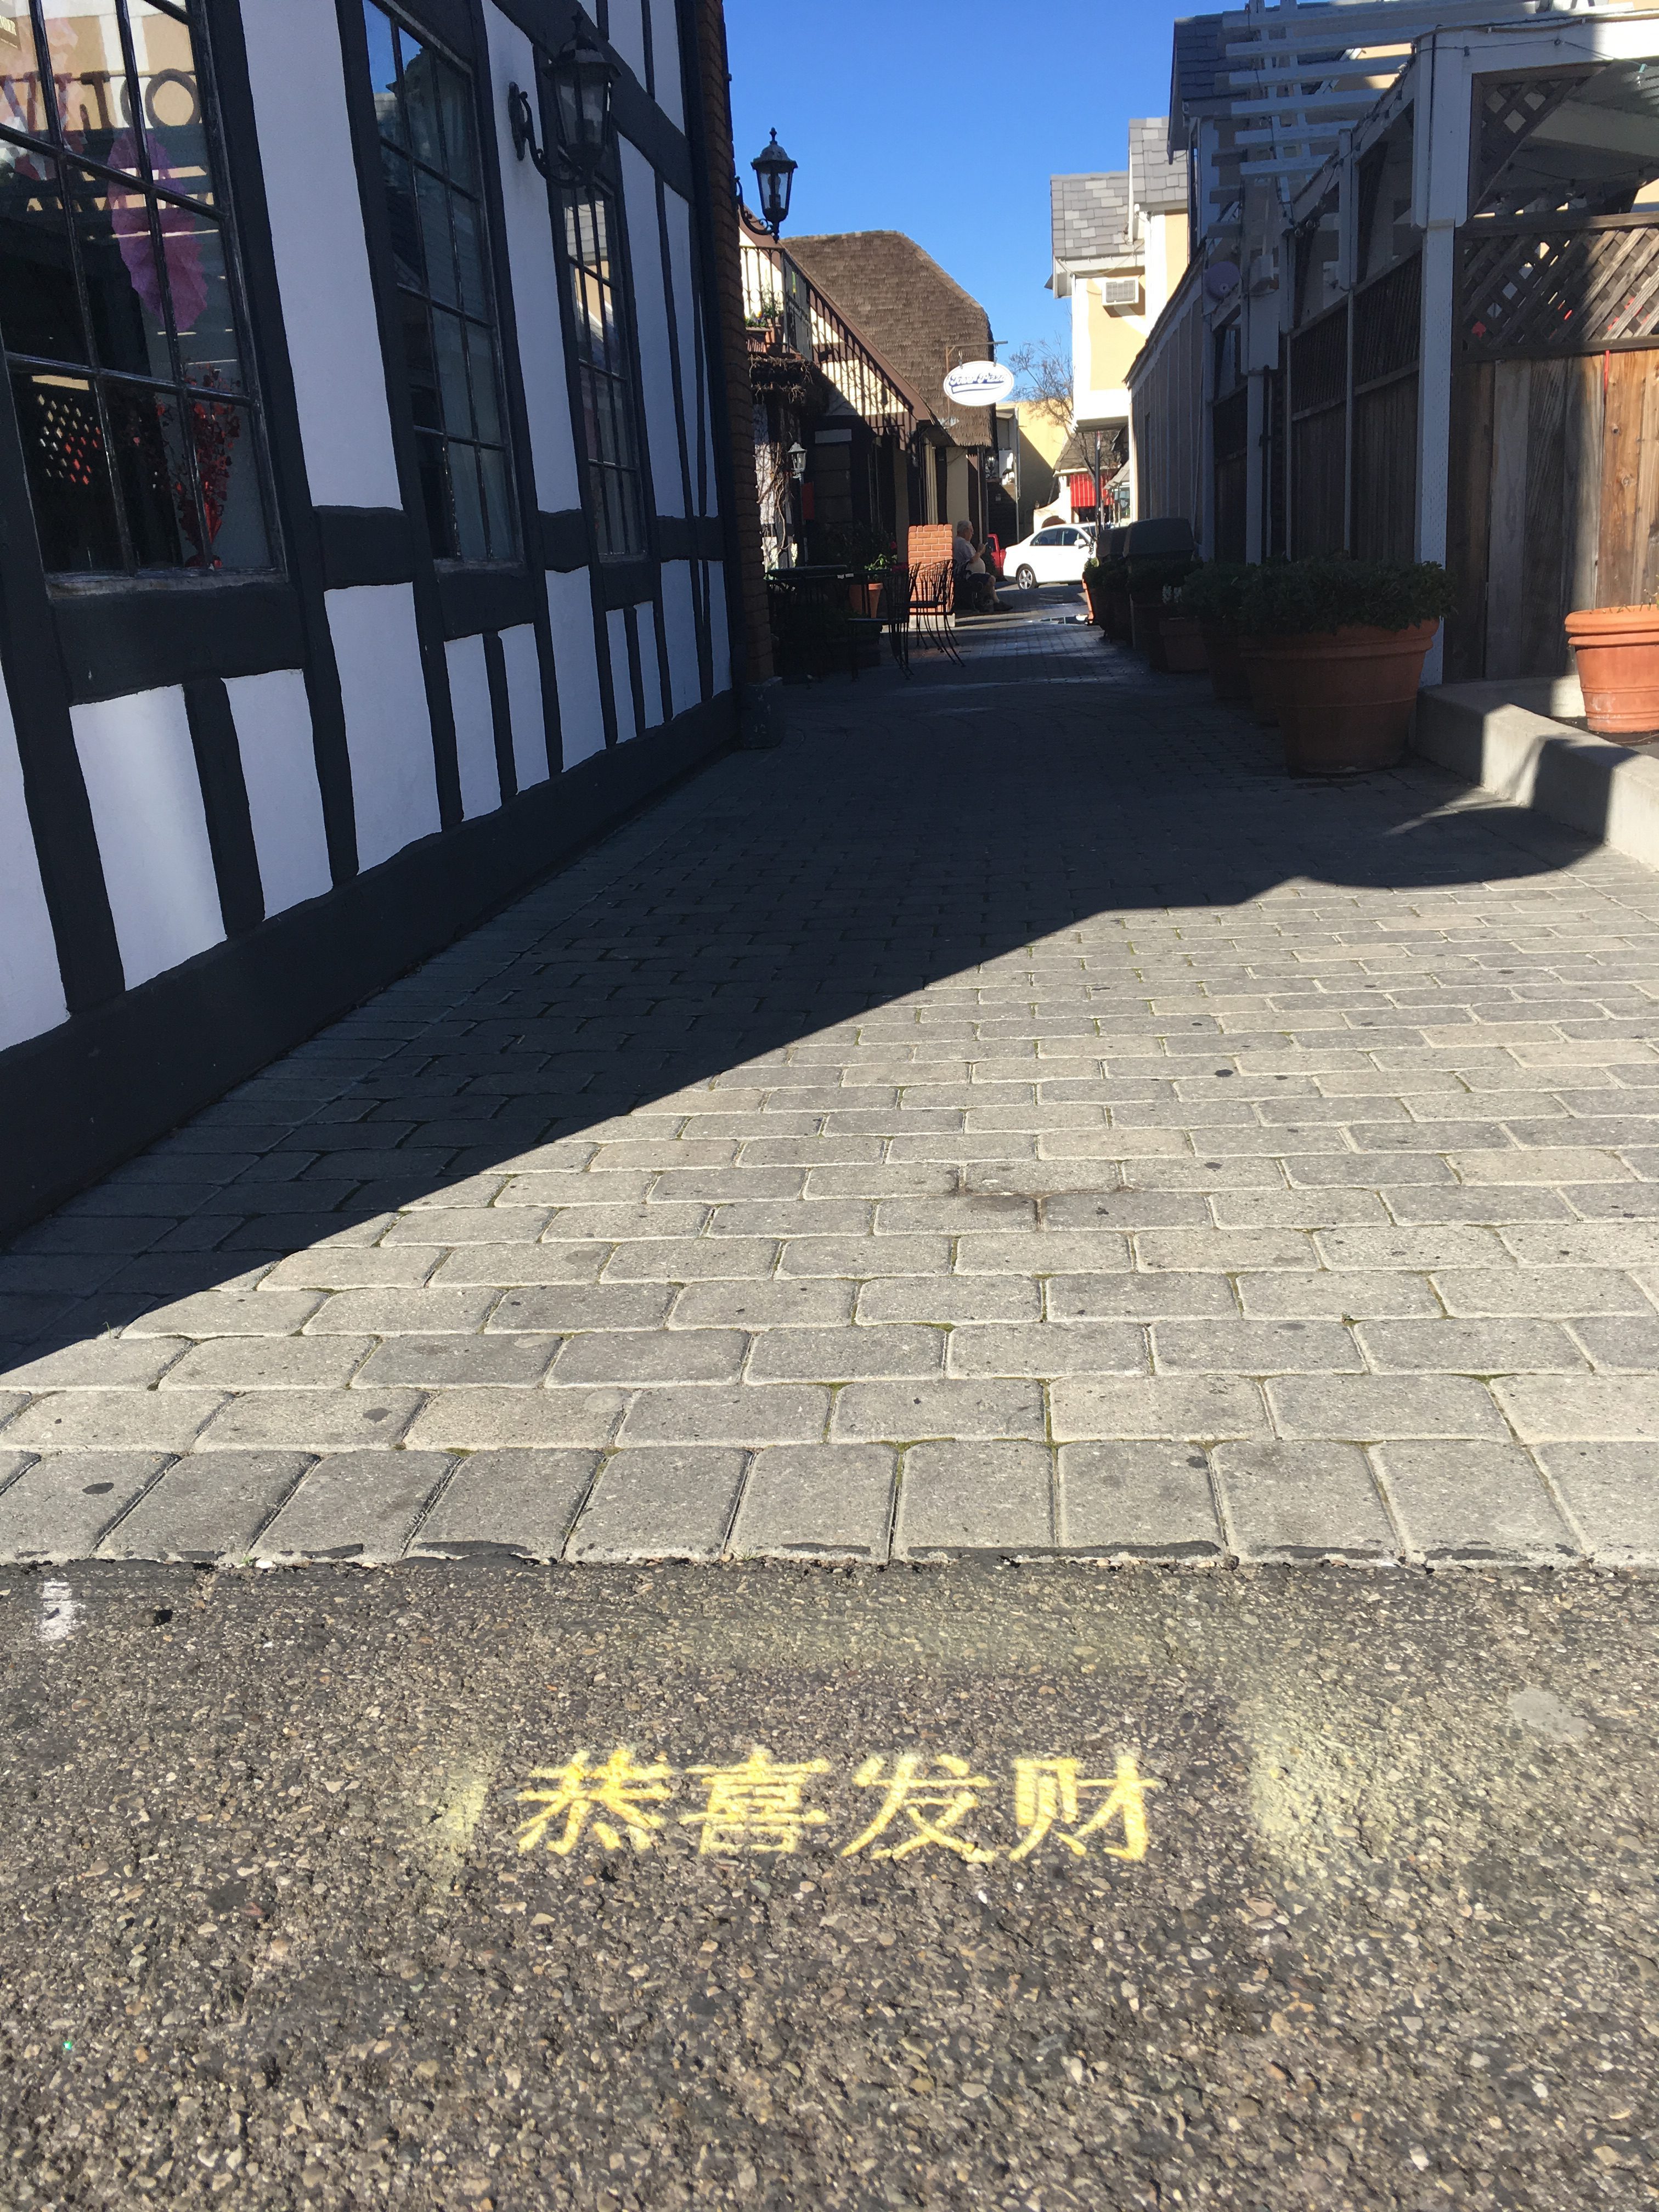 Solvang launches Chinese New Year promotion